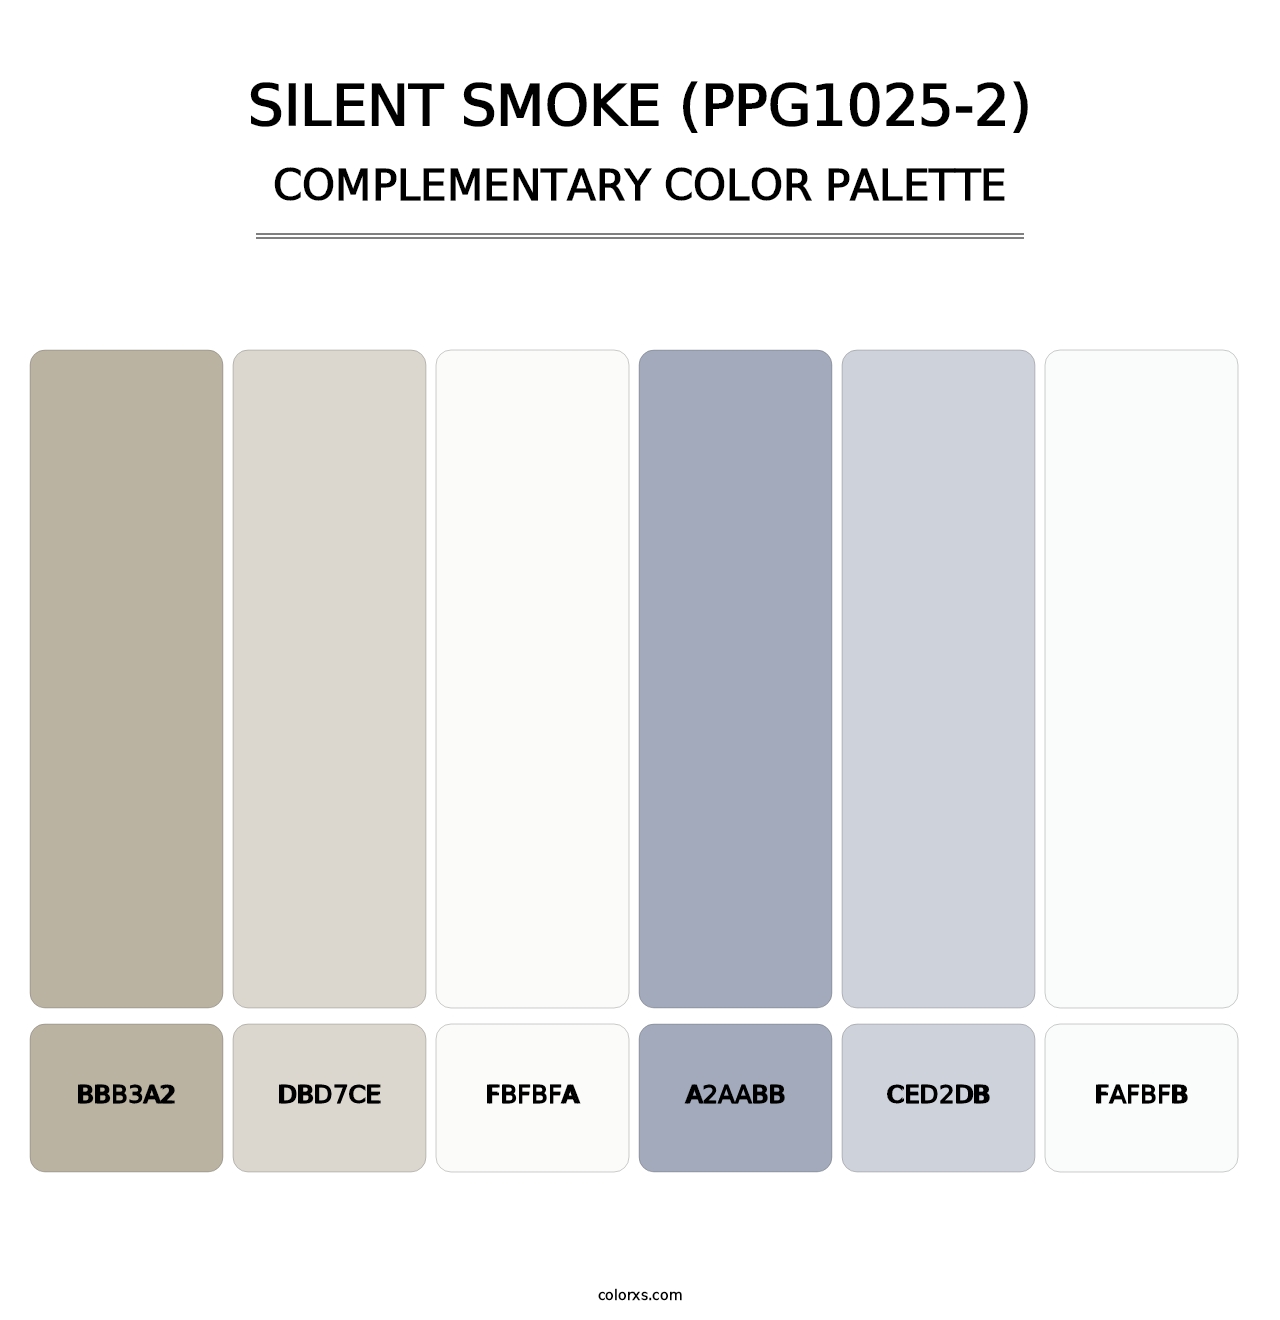 Silent Smoke (PPG1025-2) - Complementary Color Palette